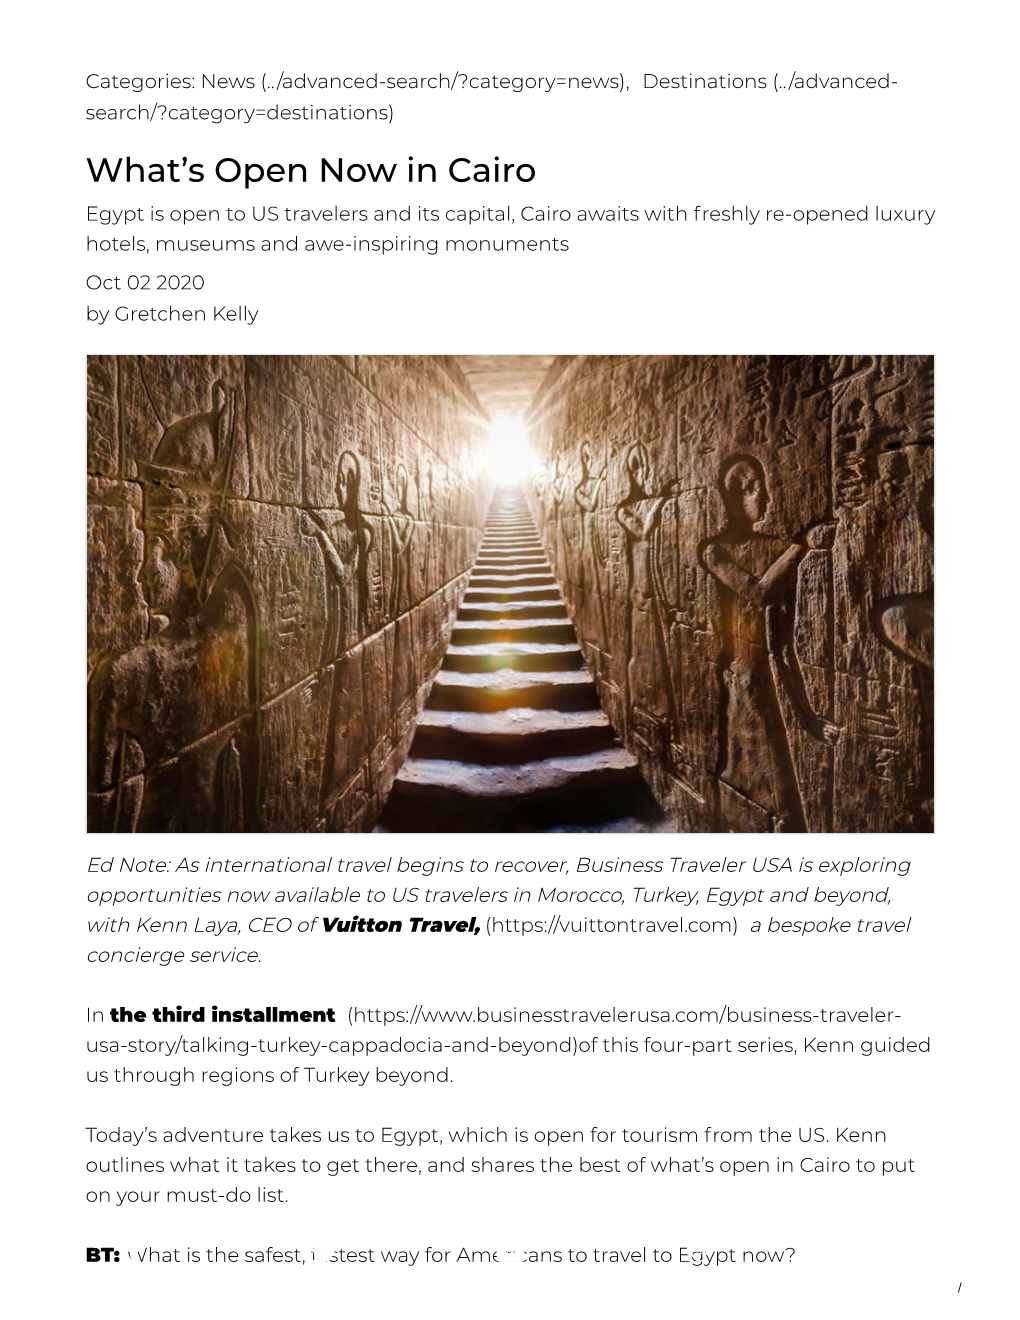 What's Open Now in Cairo (Pdf)